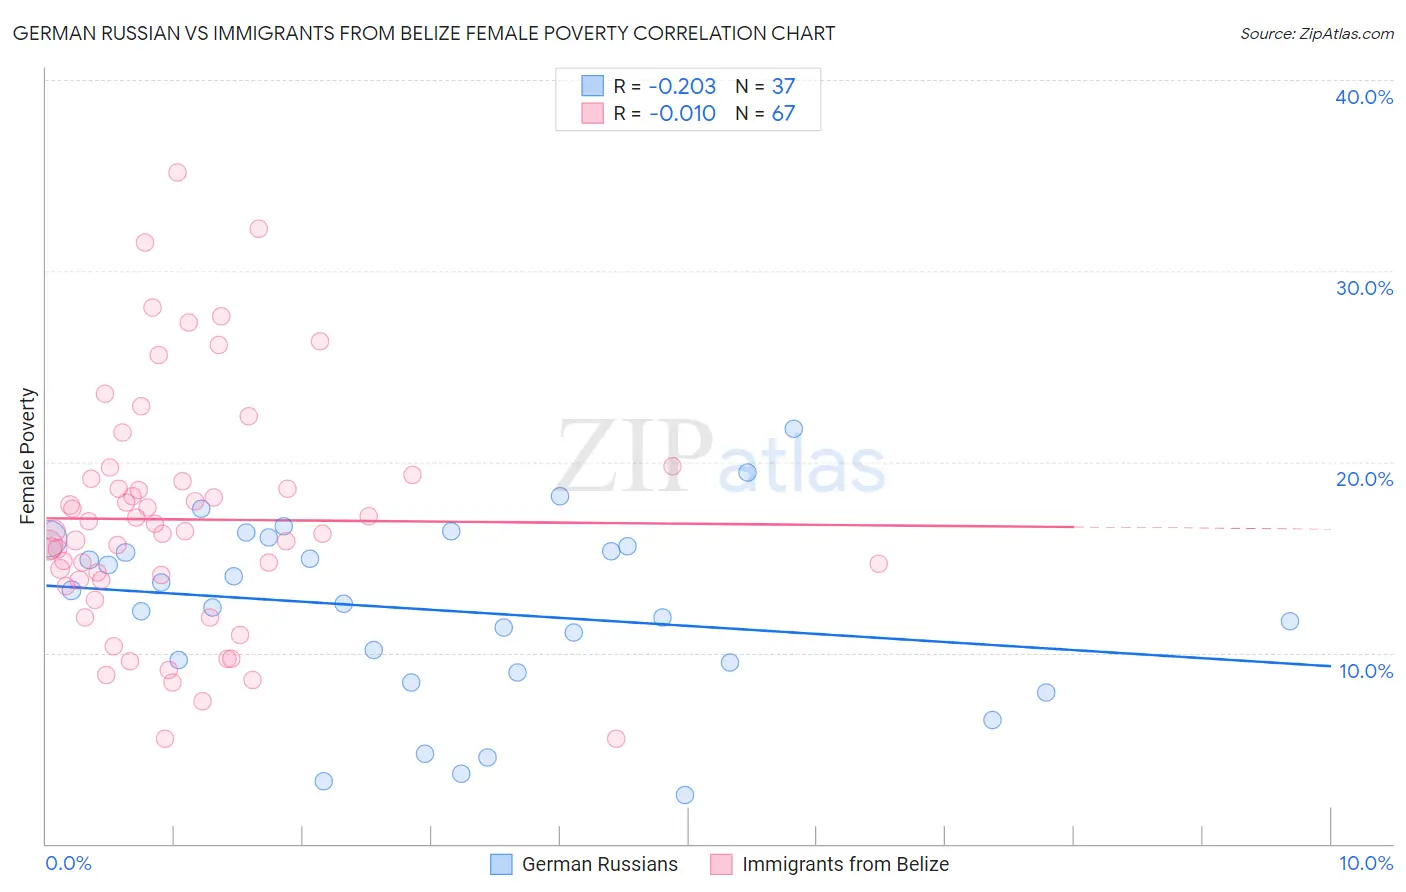 German Russian vs Immigrants from Belize Female Poverty